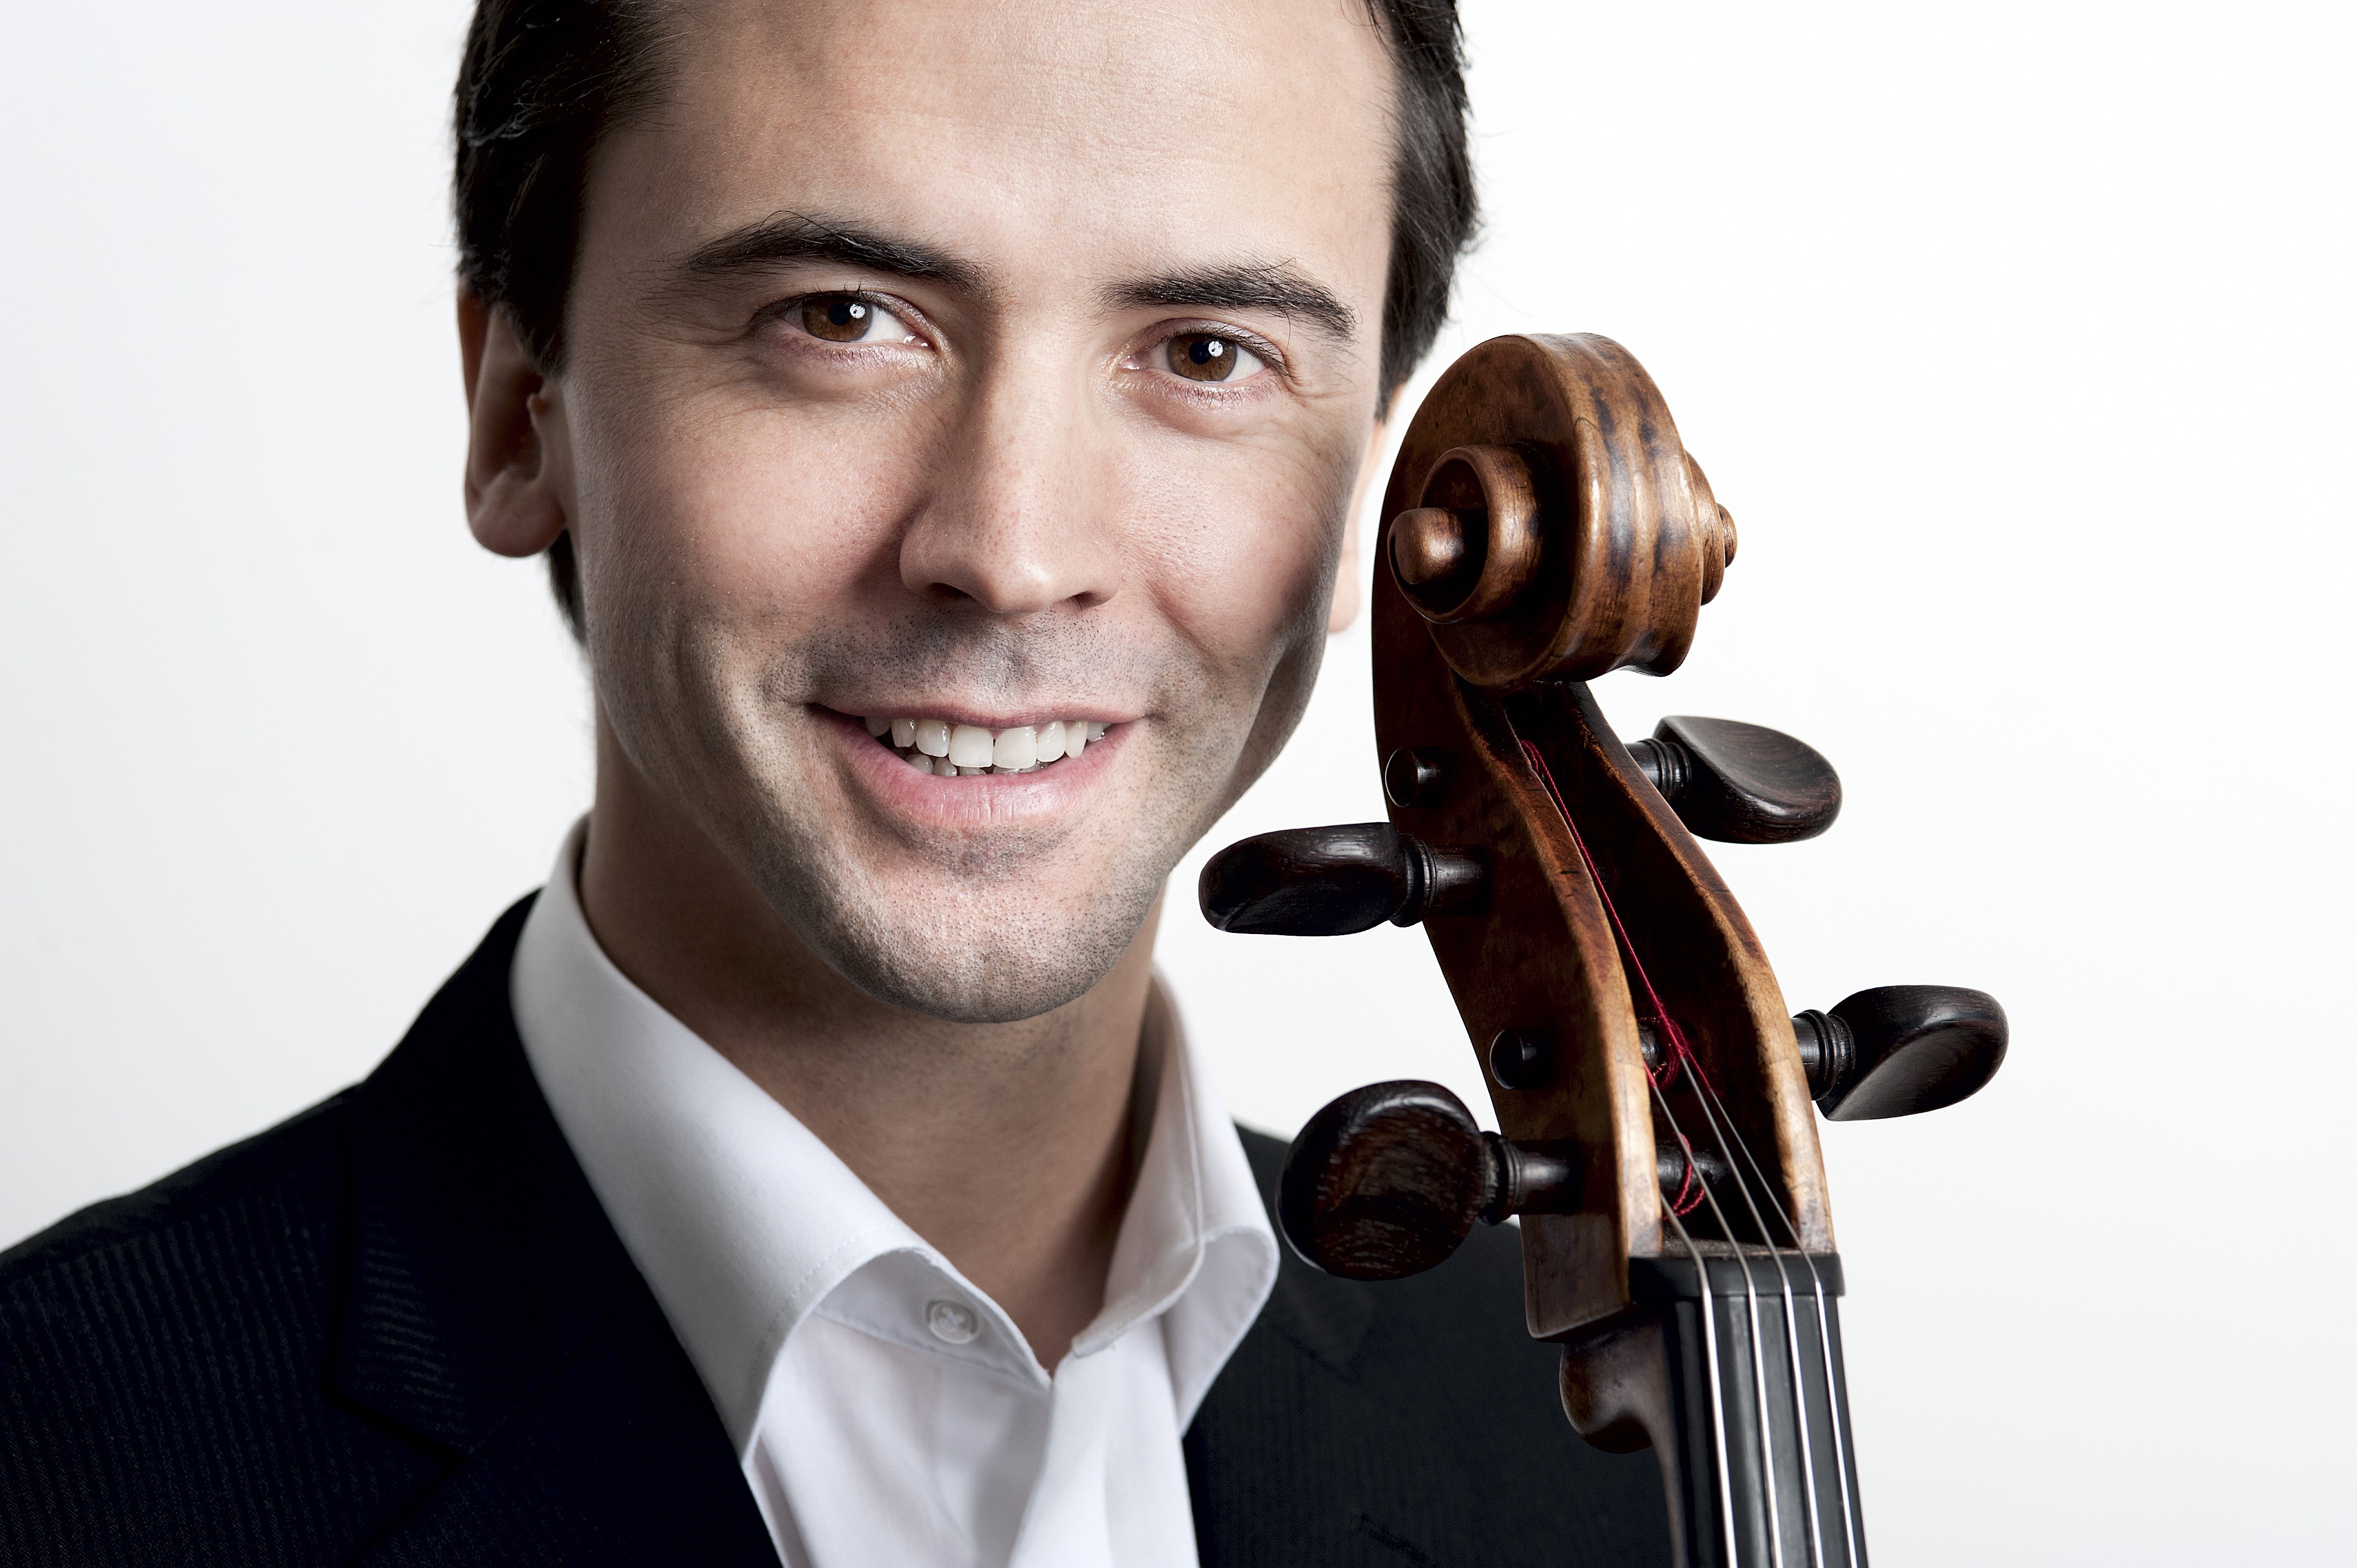 French cellist Jean-Guihen Queyras is playing two concerts in Hong Kong as part of Le French May festival.